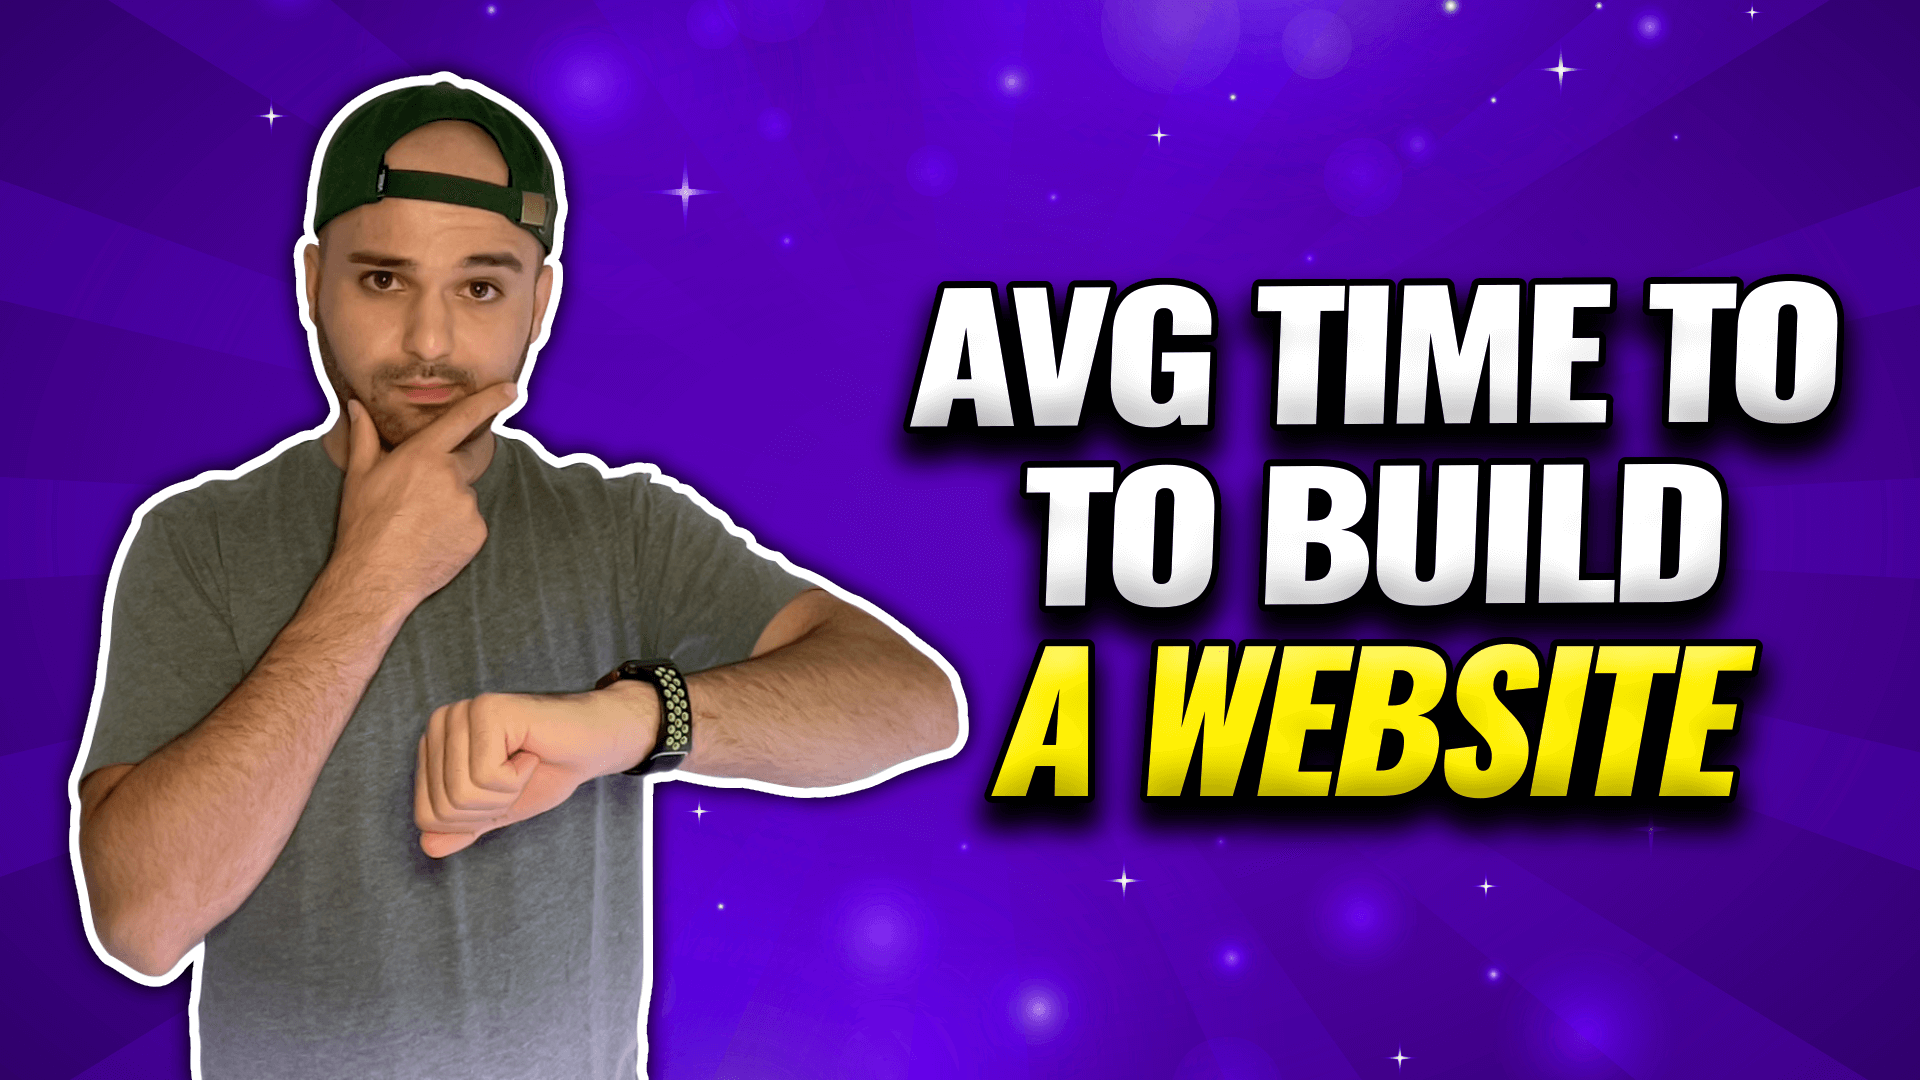 How long does it take to build a 20 page website?